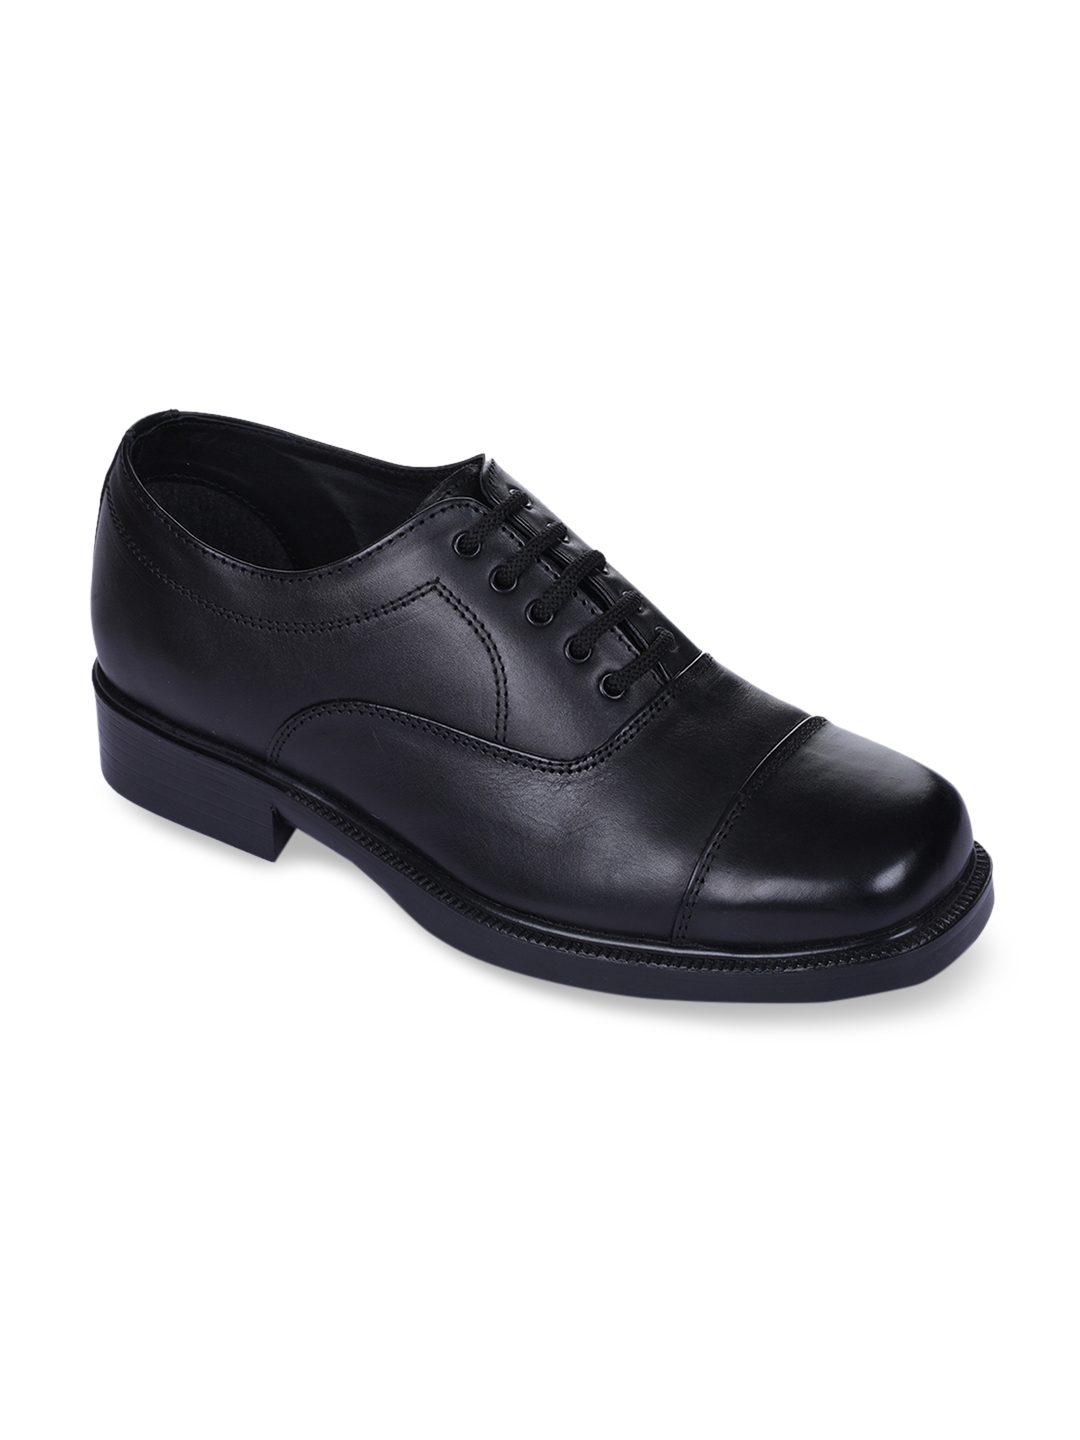 Buy Liberty Men Black Solid Leather Formal Oxfords - Formal Shoes for ...